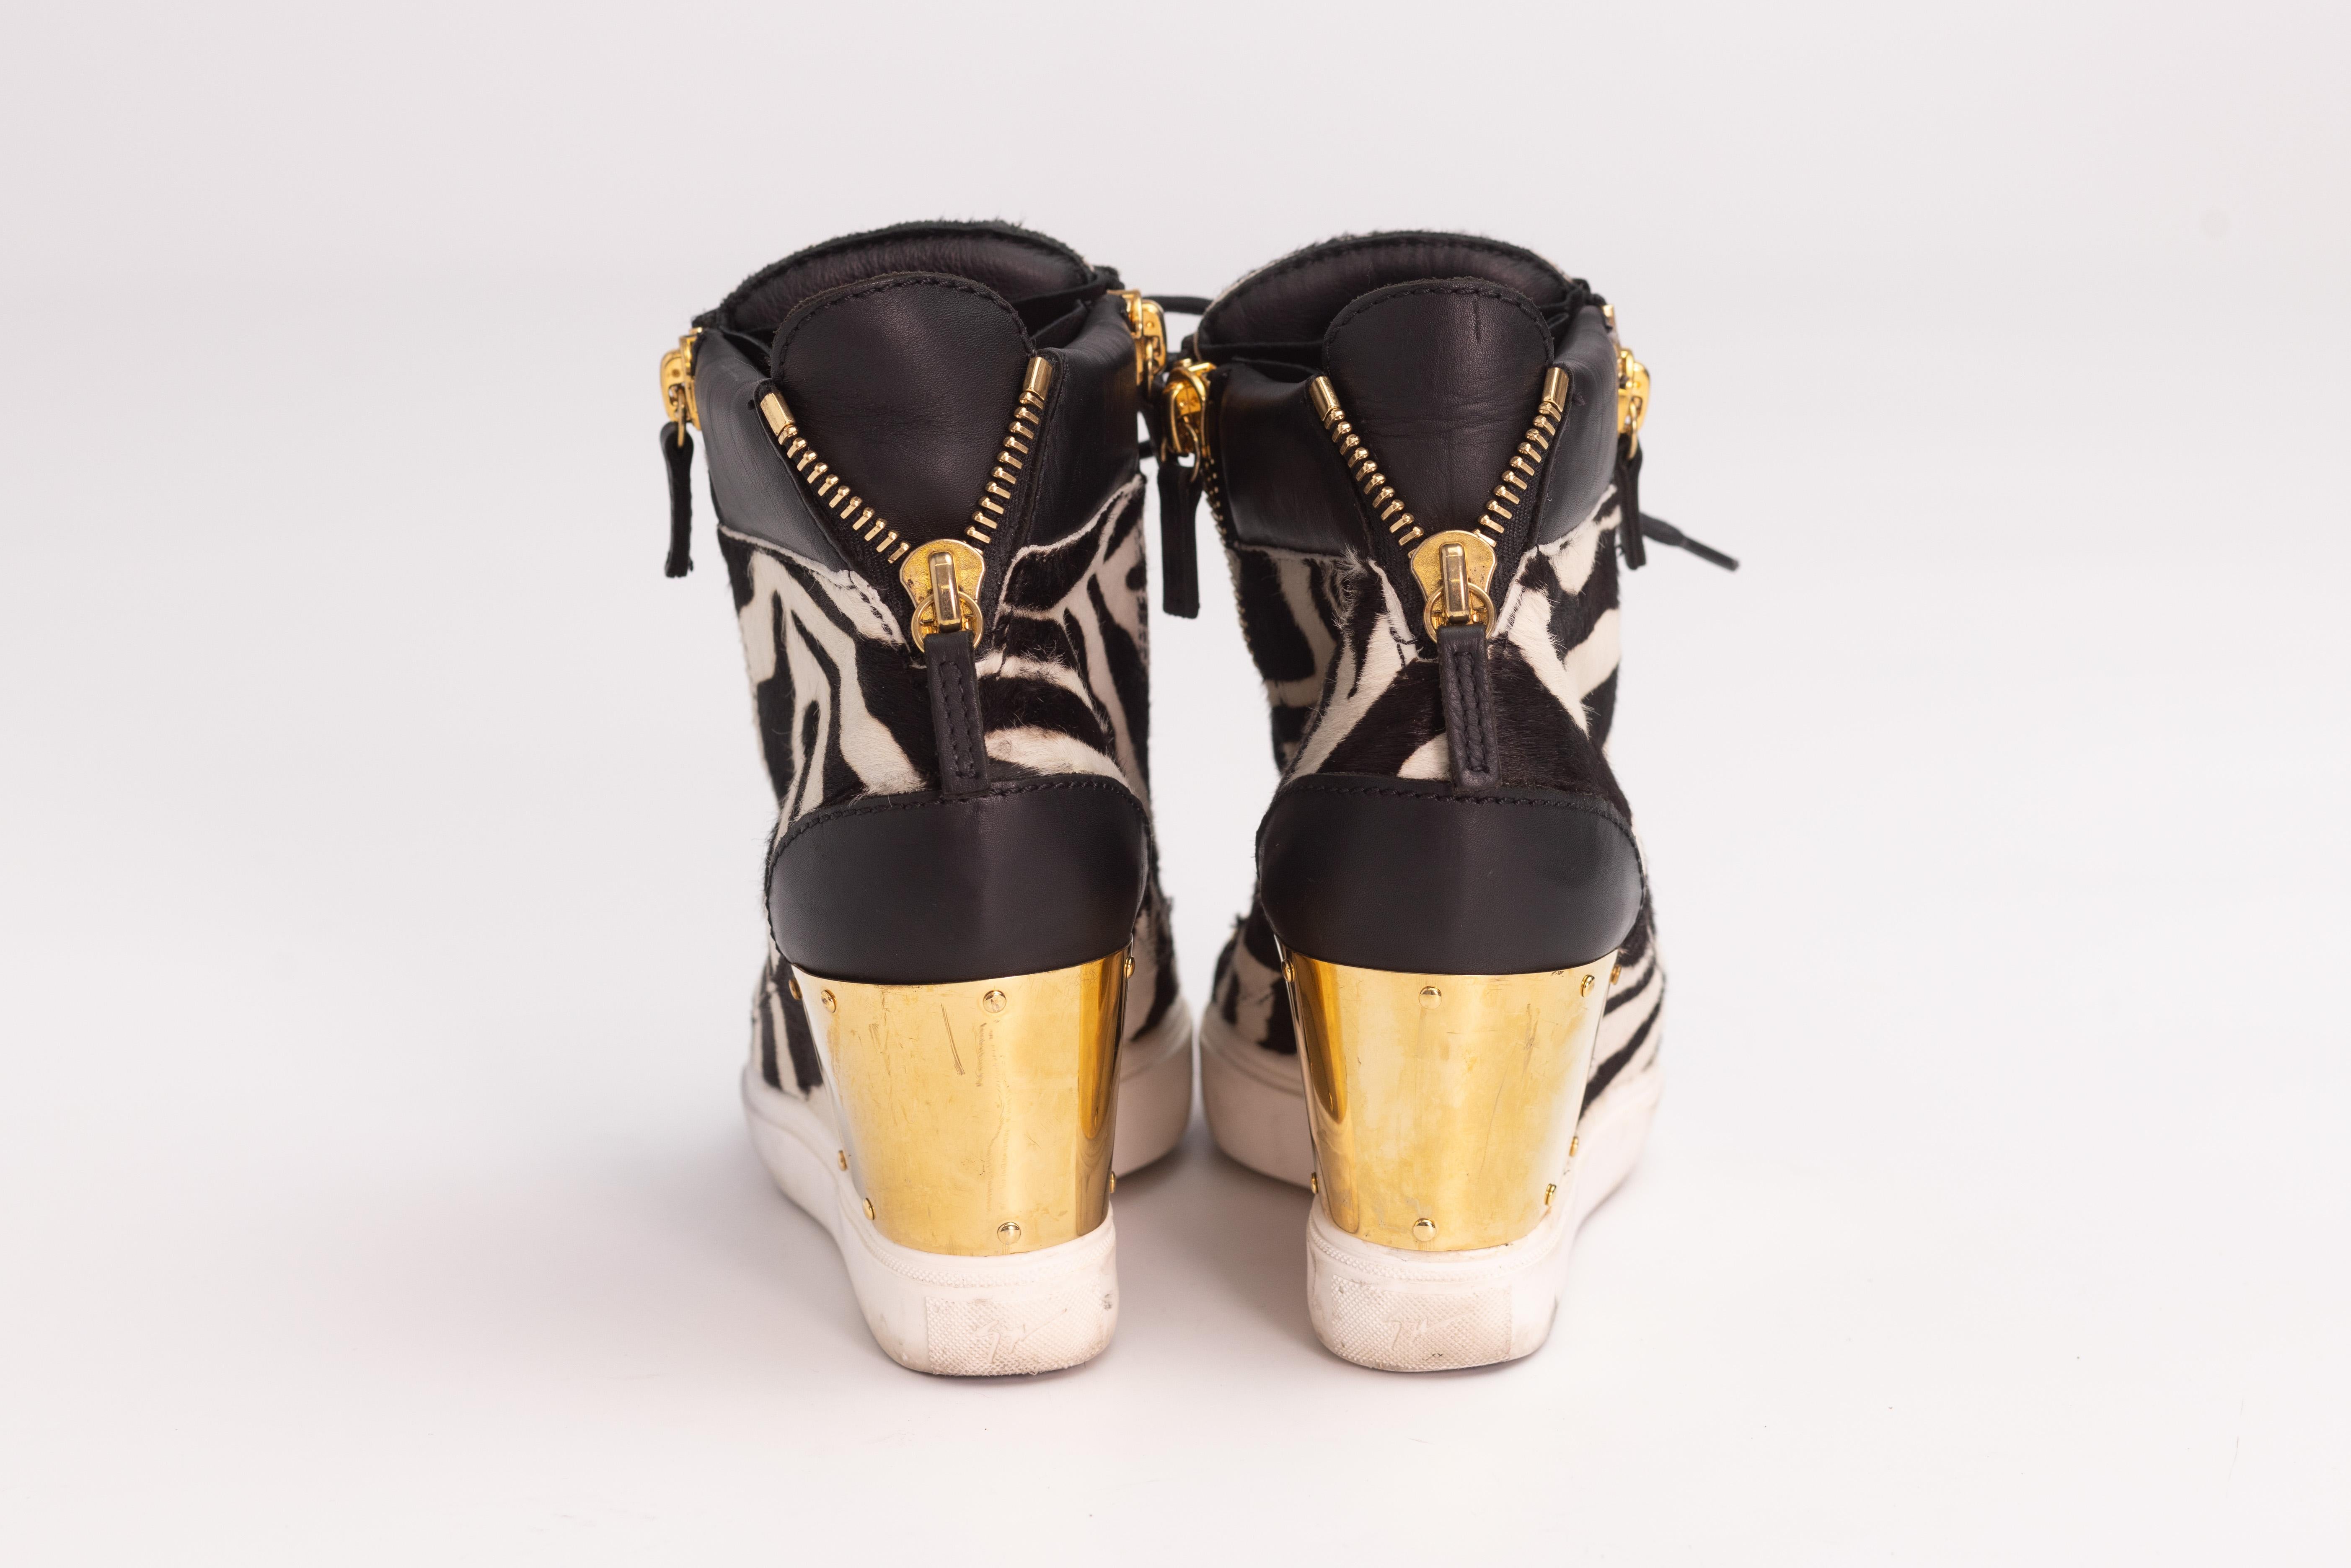 Giuseppe Zanotti Zebra Print Wedge Sneakers (EU 36) In Good Condition For Sale In Montreal, Quebec